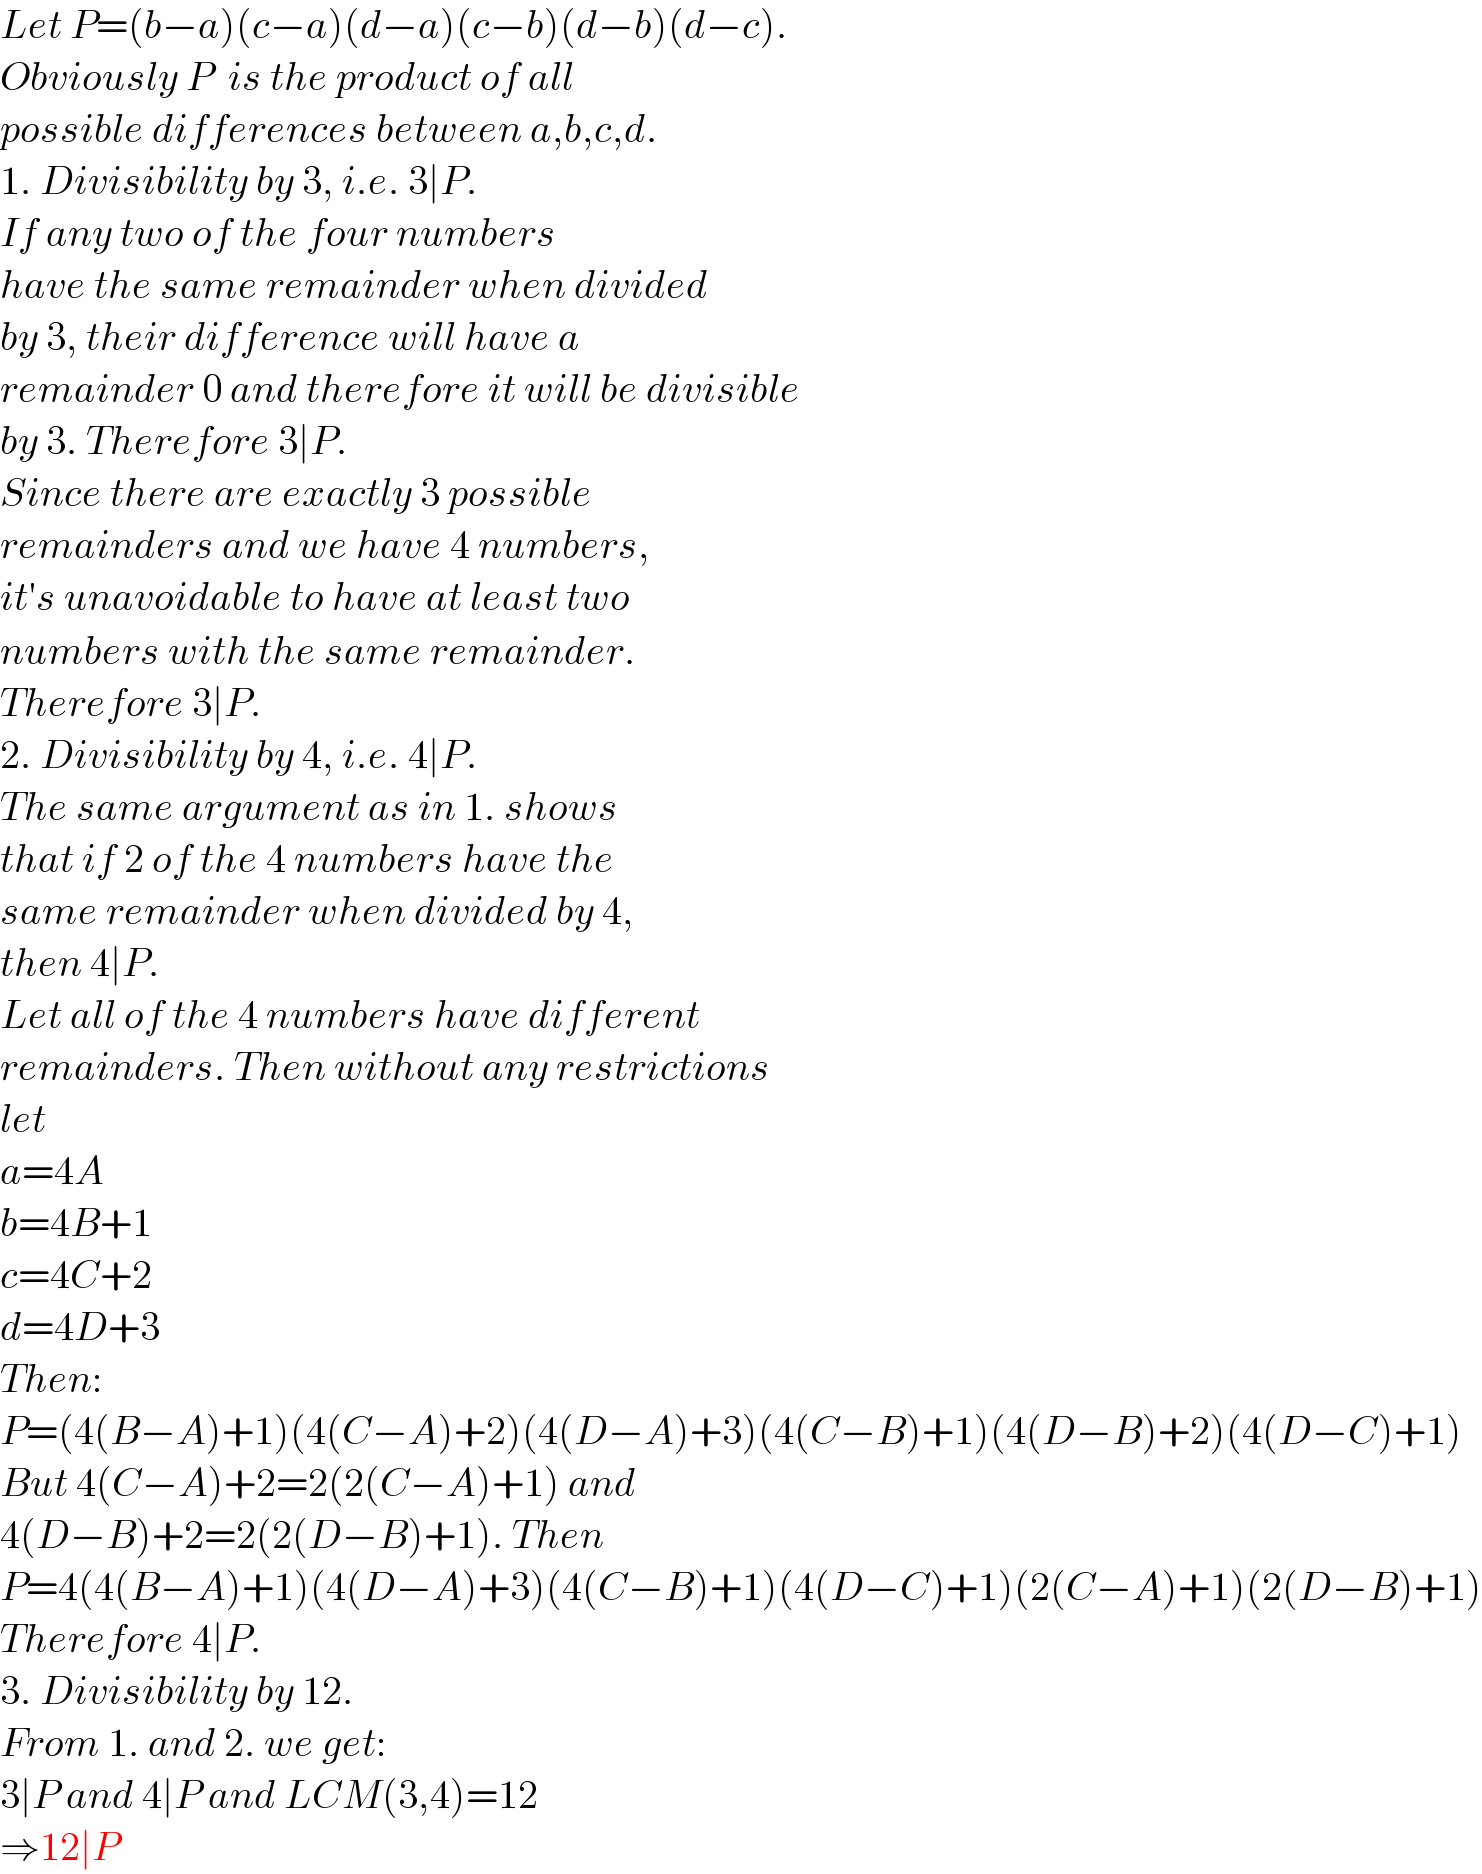 Let P=(b−a)(c−a)(d−a)(c−b)(d−b)(d−c).  Obviously P  is the product of all  possible differences between a,b,c,d.  1. Divisibility by 3, i.e. 3∣P.  If any two of the four numbers  have the same remainder when divided  by 3, their difference will have a  remainder 0 and therefore it will be divisible  by 3. Therefore 3∣P.  Since there are exactly 3 possible   remainders and we have 4 numbers,  it′s unavoidable to have at least two  numbers with the same remainder.  Therefore 3∣P.  2. Divisibility by 4, i.e. 4∣P.  The same argument as in 1. shows   that if 2 of the 4 numbers have the  same remainder when divided by 4,  then 4∣P.  Let all of the 4 numbers have different  remainders. Then without any restrictions  let  a=4A  b=4B+1  c=4C+2  d=4D+3  Then:  P=(4(B−A)+1)(4(C−A)+2)(4(D−A)+3)(4(C−B)+1)(4(D−B)+2)(4(D−C)+1)  But 4(C−A)+2=2(2(C−A)+1) and  4(D−B)+2=2(2(D−B)+1). Then  P=4(4(B−A)+1)(4(D−A)+3)(4(C−B)+1)(4(D−C)+1)(2(C−A)+1)(2(D−B)+1)  Therefore 4∣P.  3. Divisibility by 12.  From 1. and 2. we get:  3∣P and 4∣P and LCM(3,4)=12  ⇒12∣P  